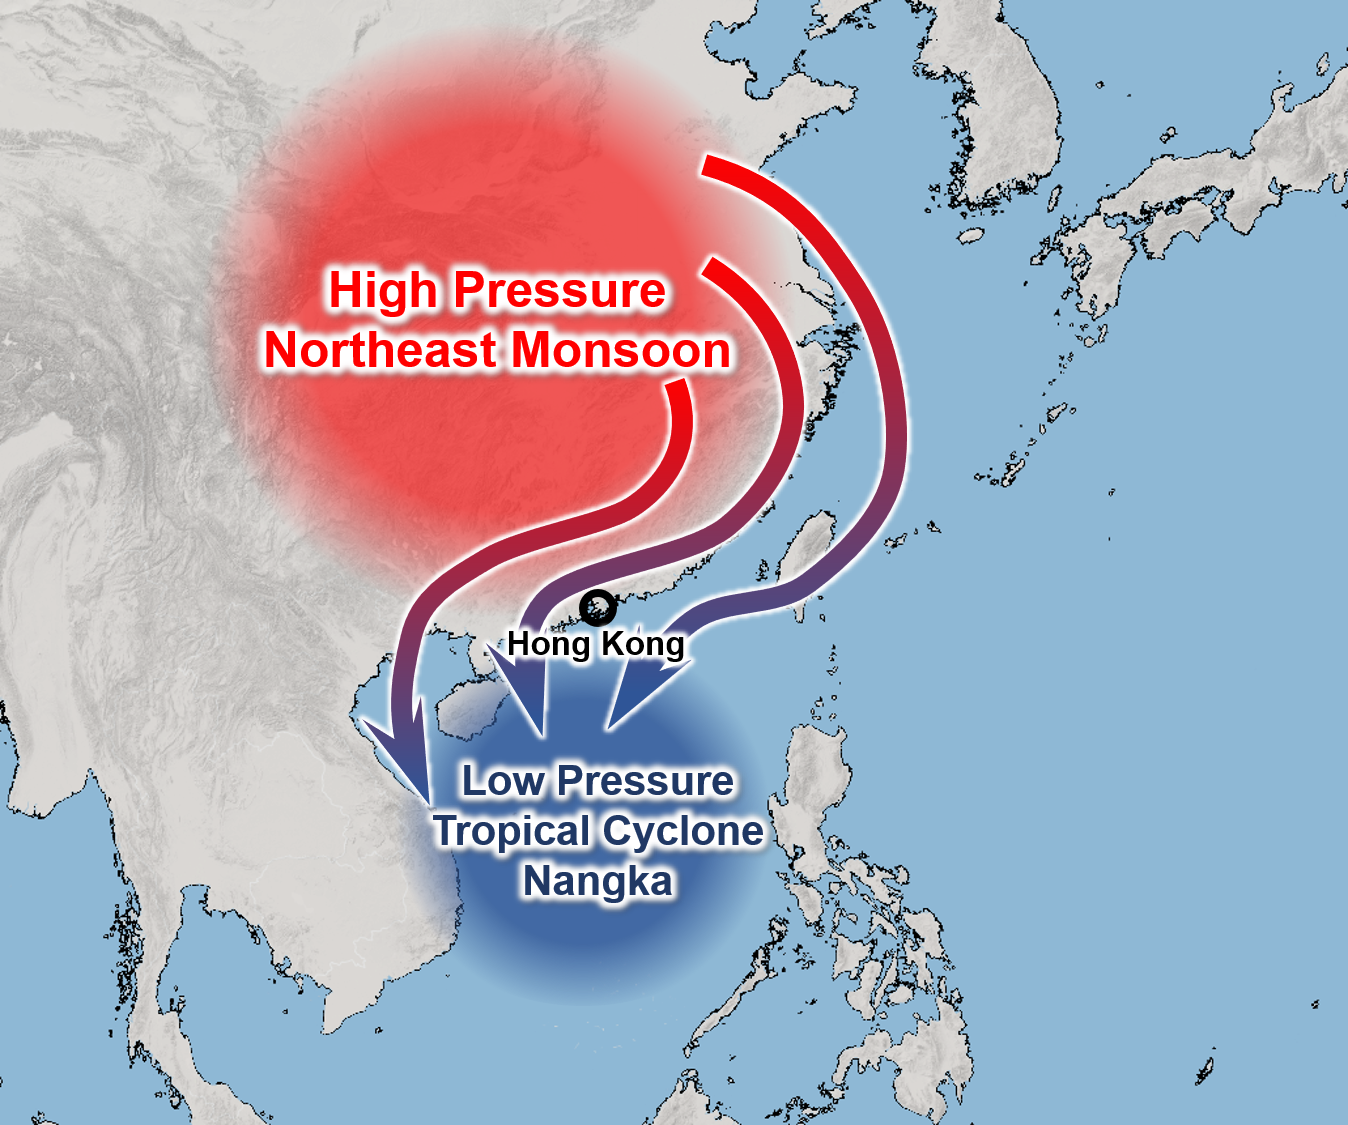 Fig. 1: The combined effect of a tropical cyclone and a northeast monsoon resulted in strong winds along the South China coast